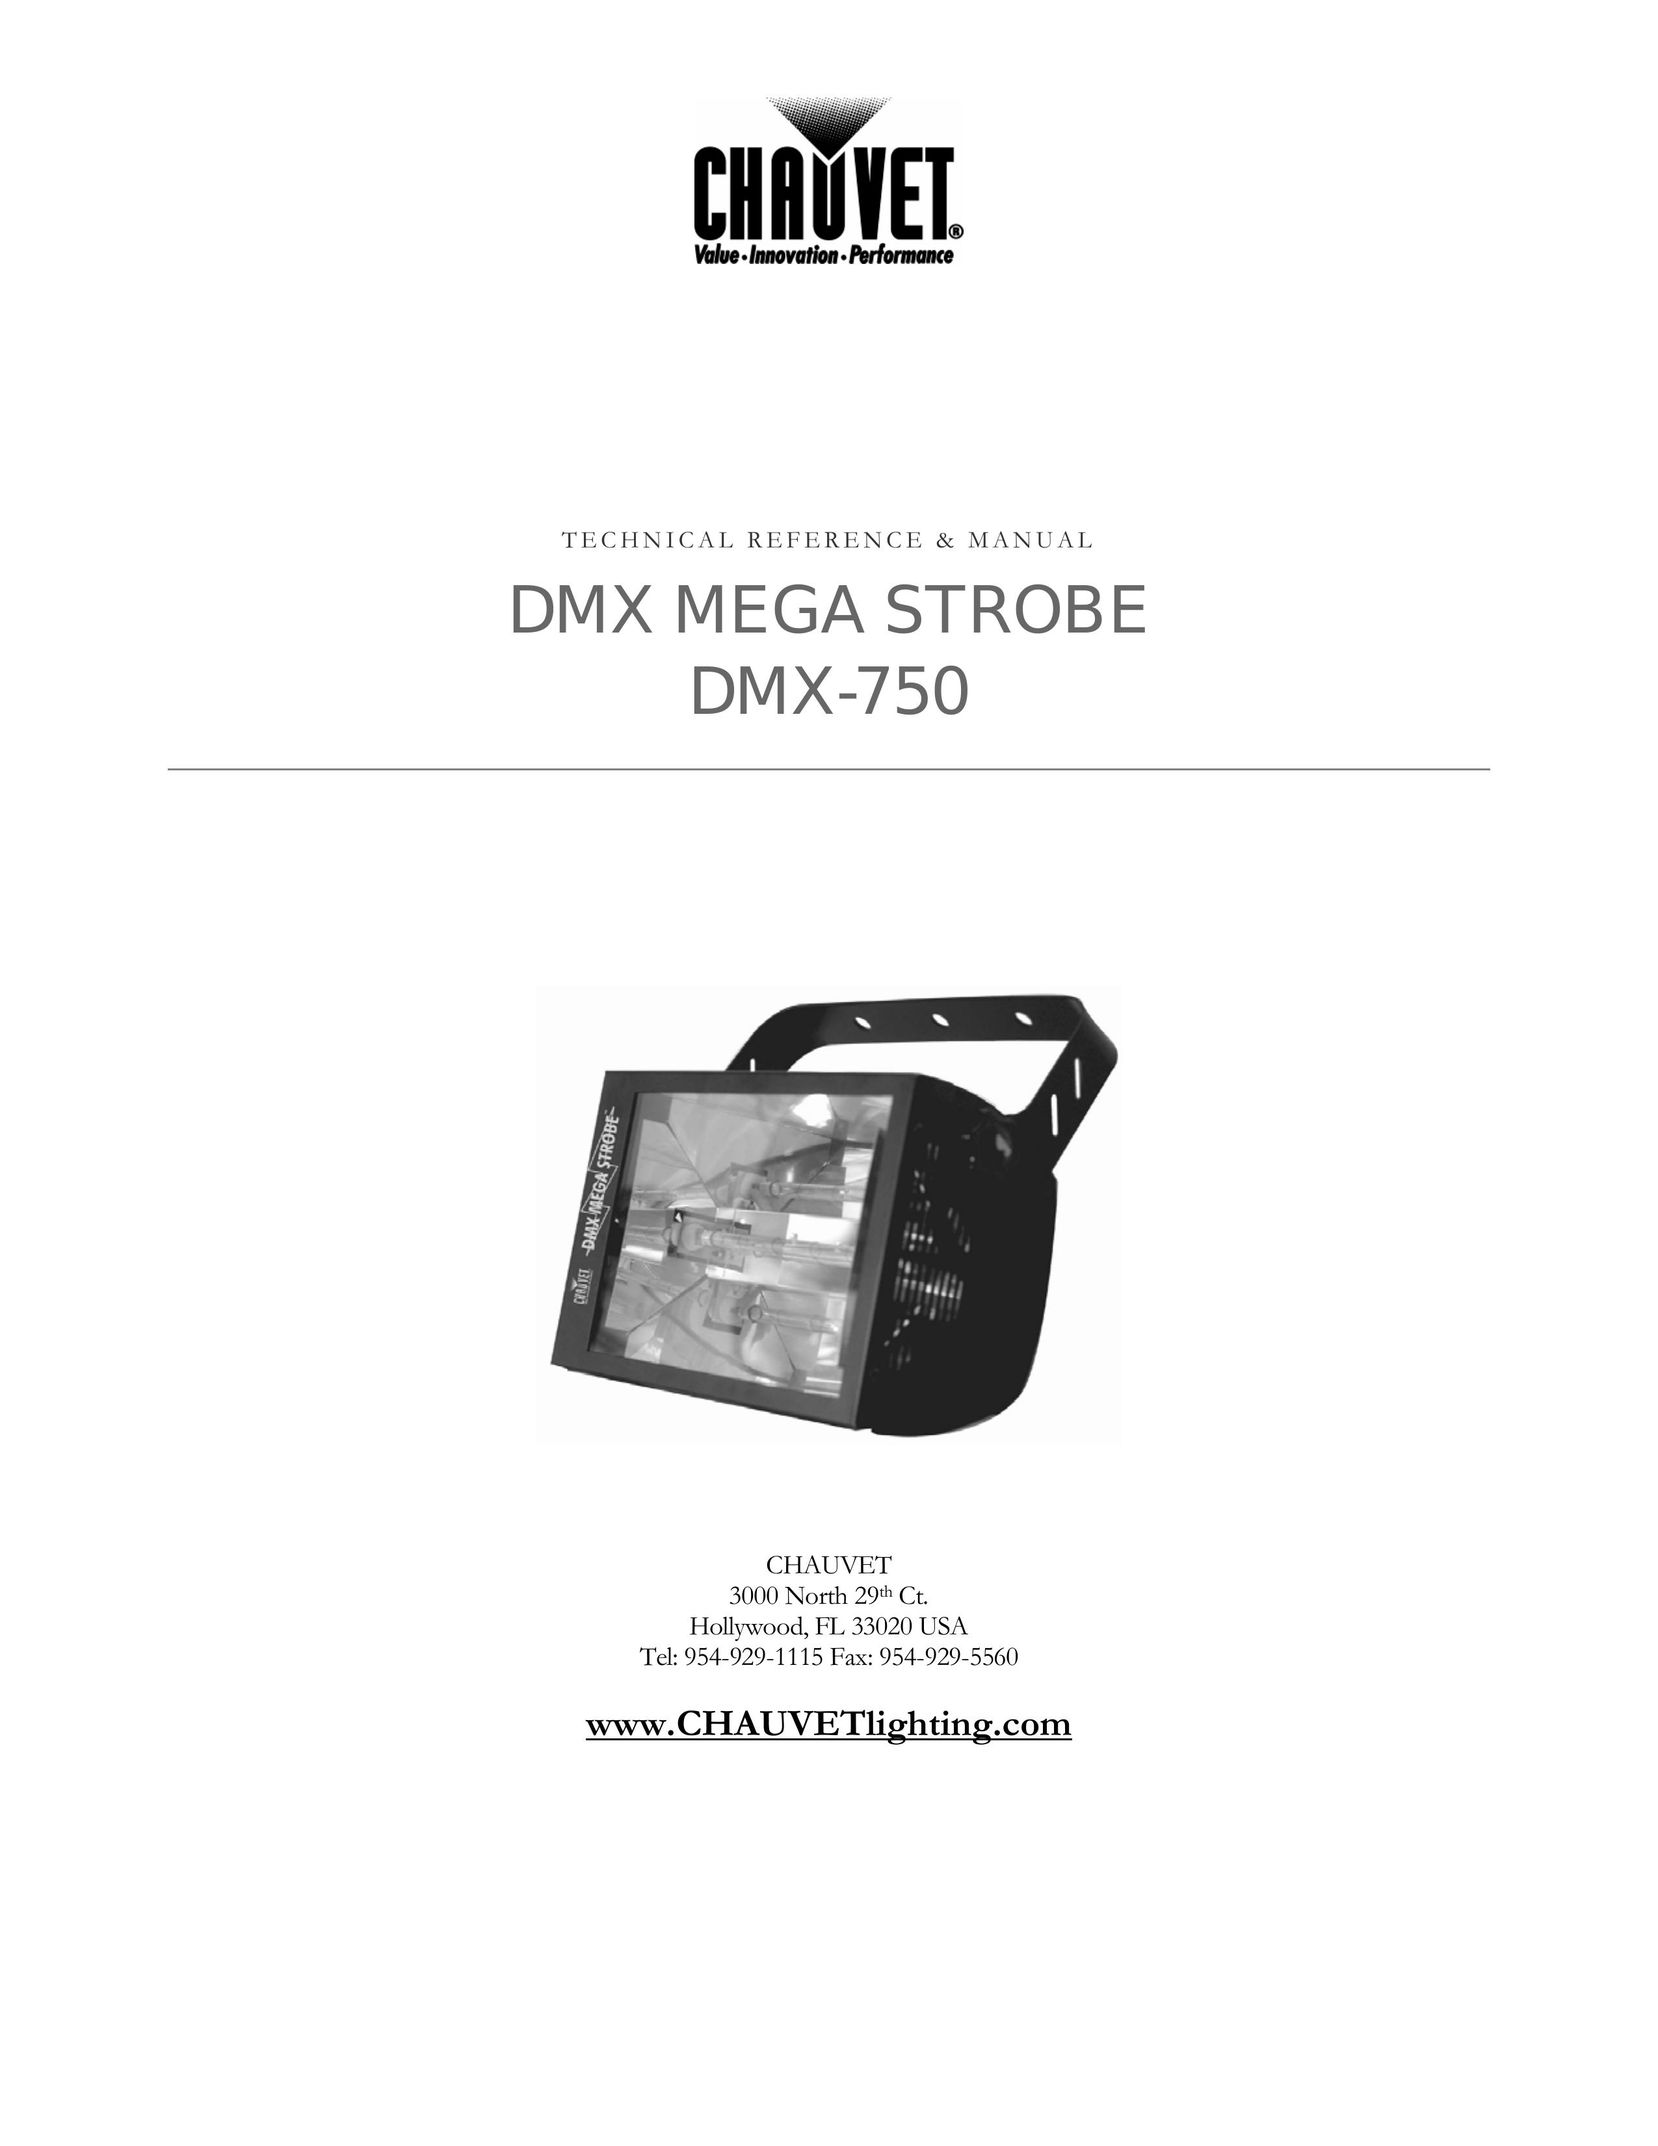 Chauvet DMX-750 Home Safety Product User Manual